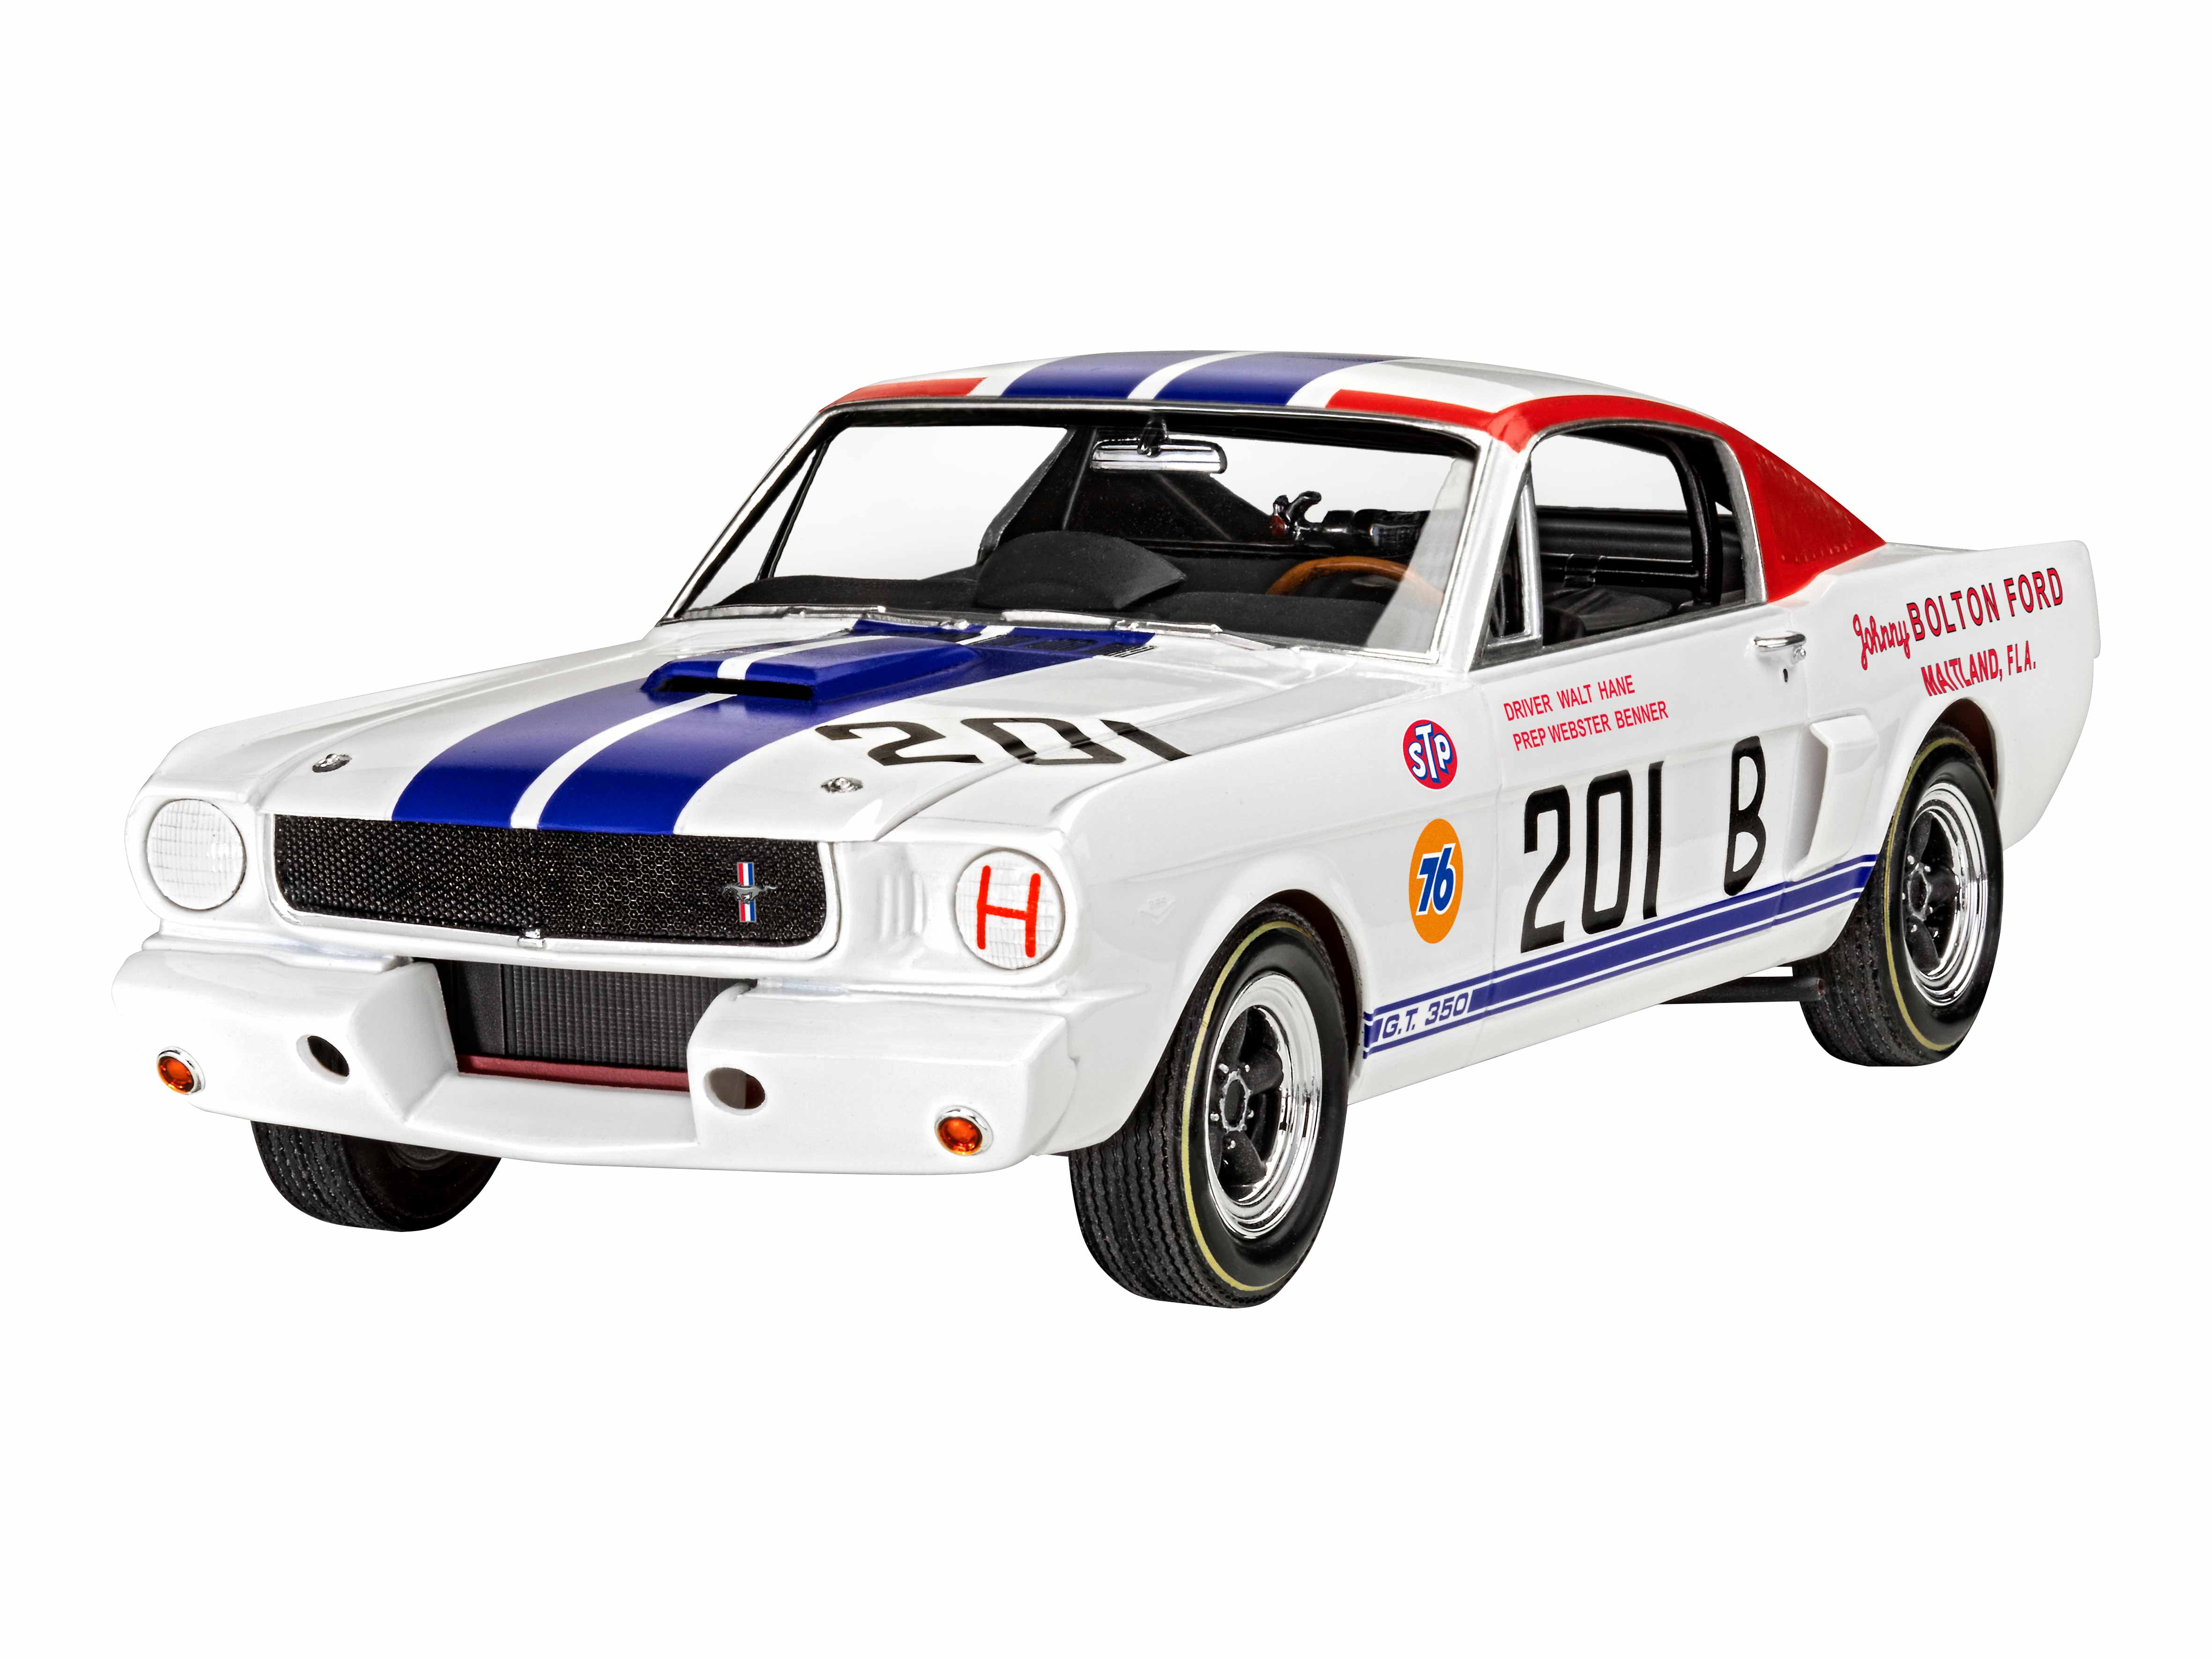 Revell 1/24 1965 Shelby Mustang GT 350 R # 07716